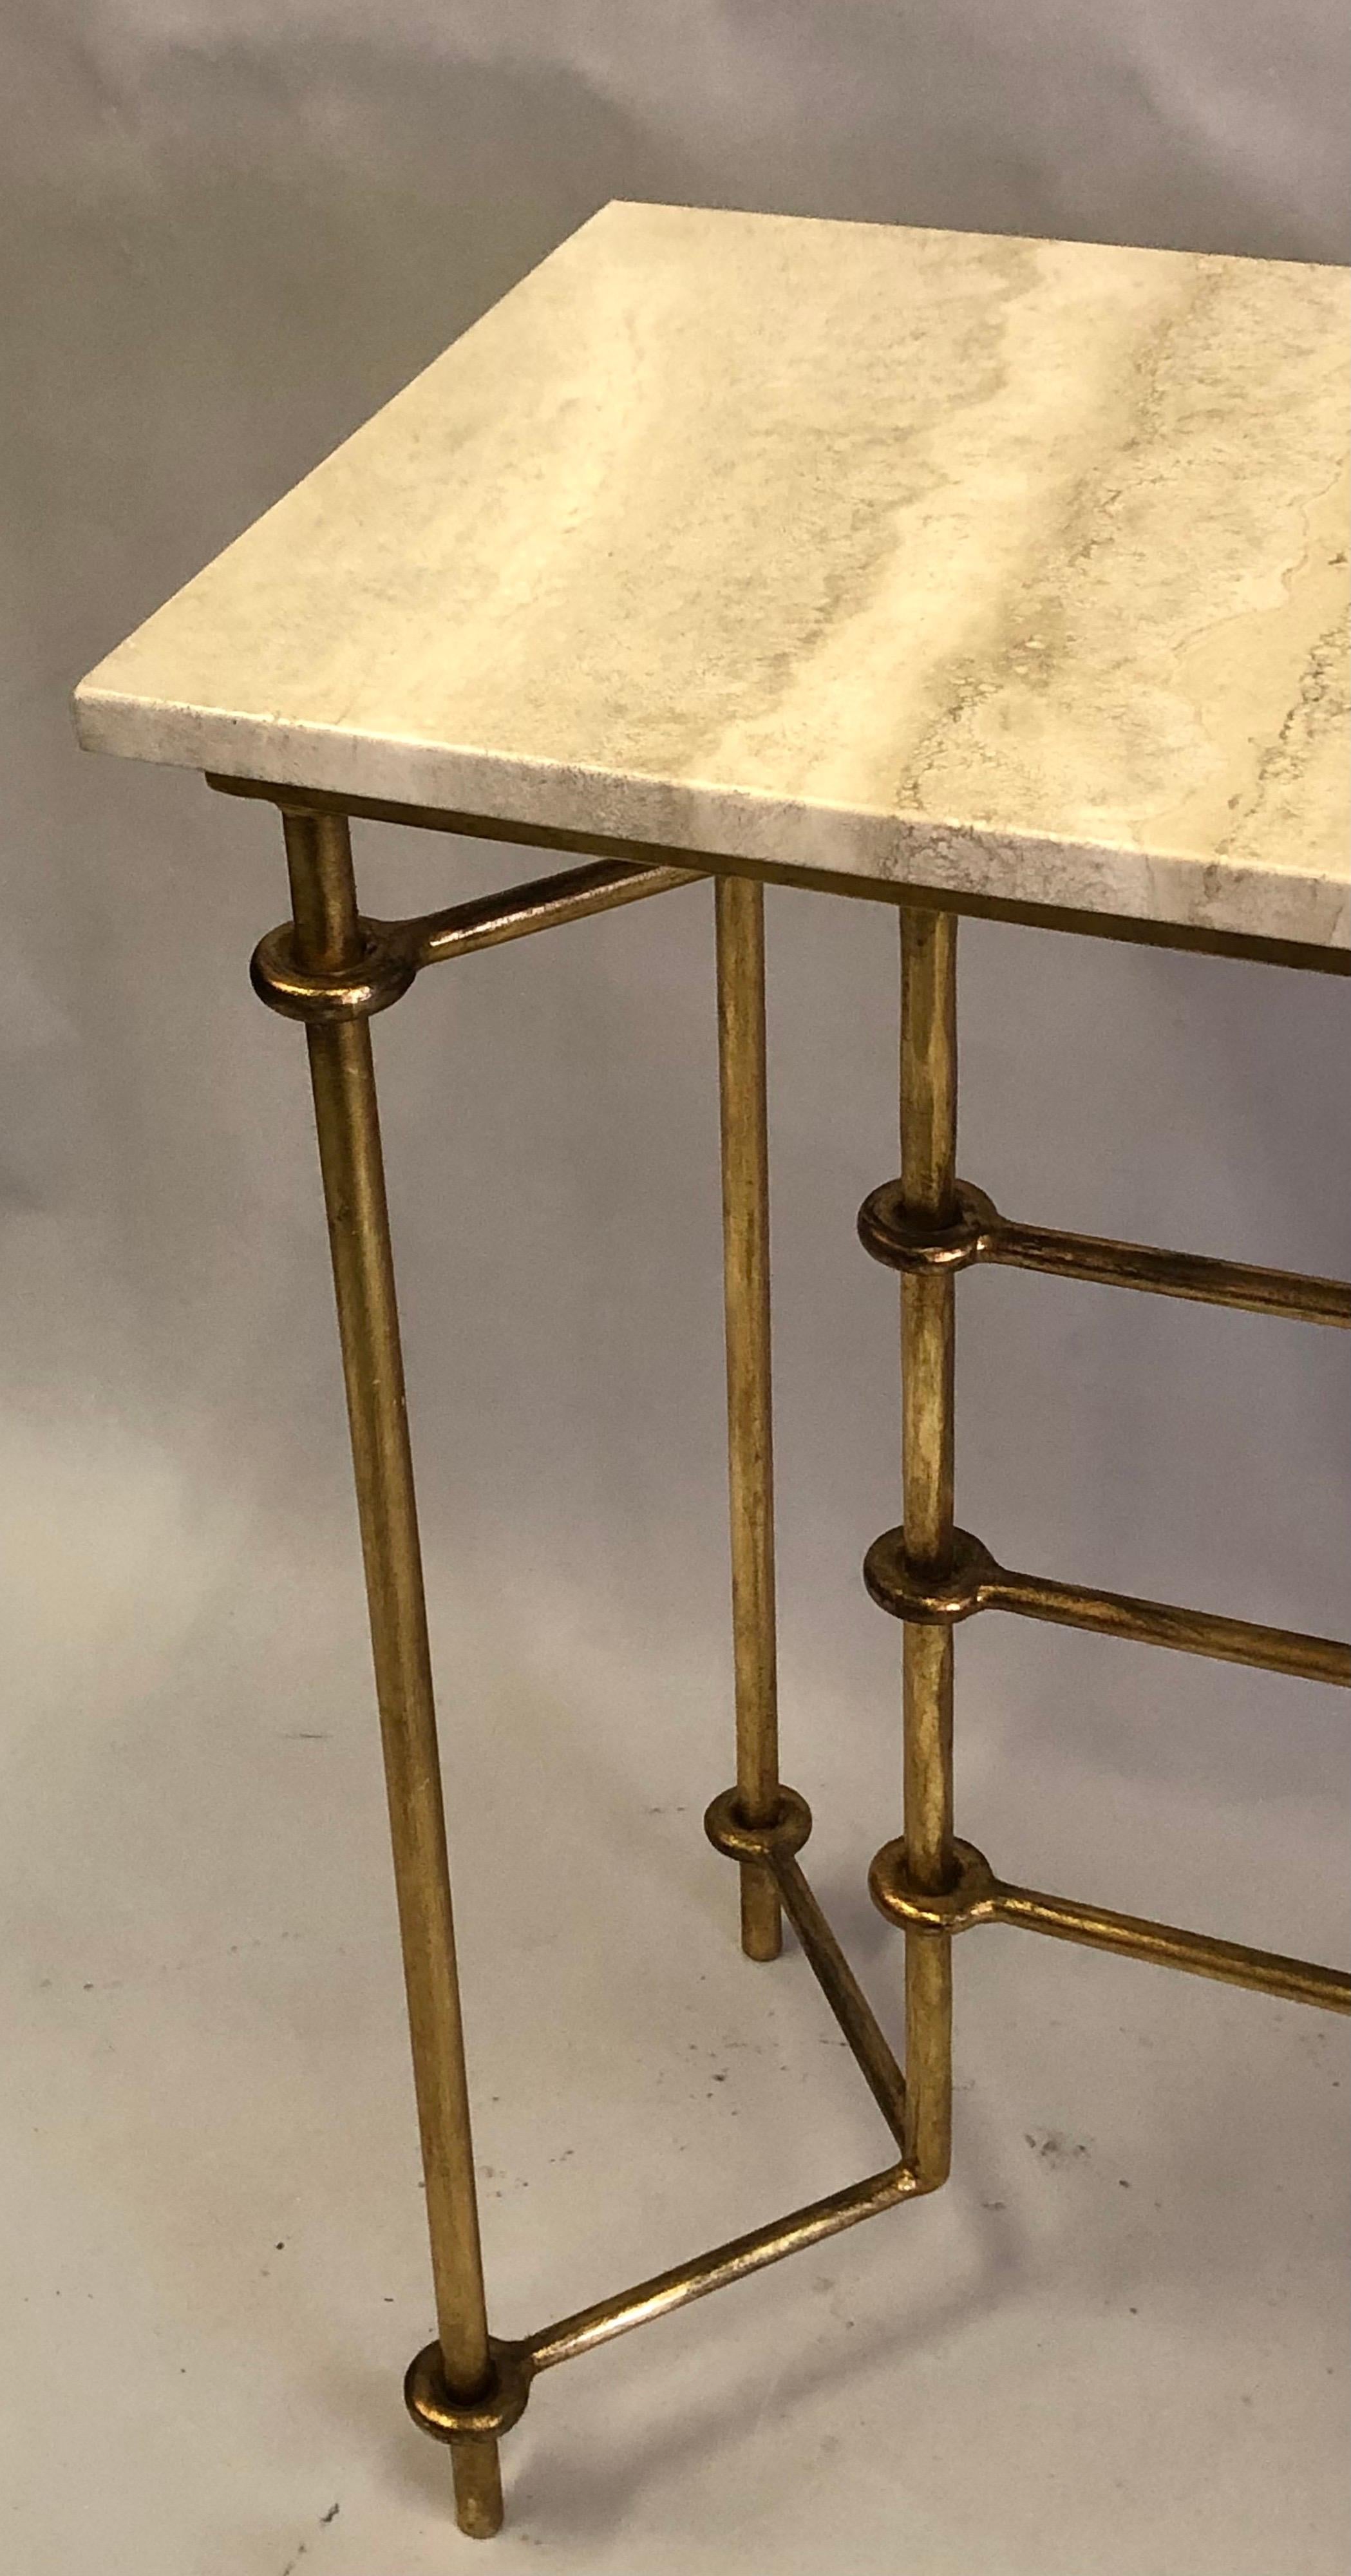 Italian Mid-Century Modern Neoclassical Gilt Iron Console by Banci for Hermès For Sale 2